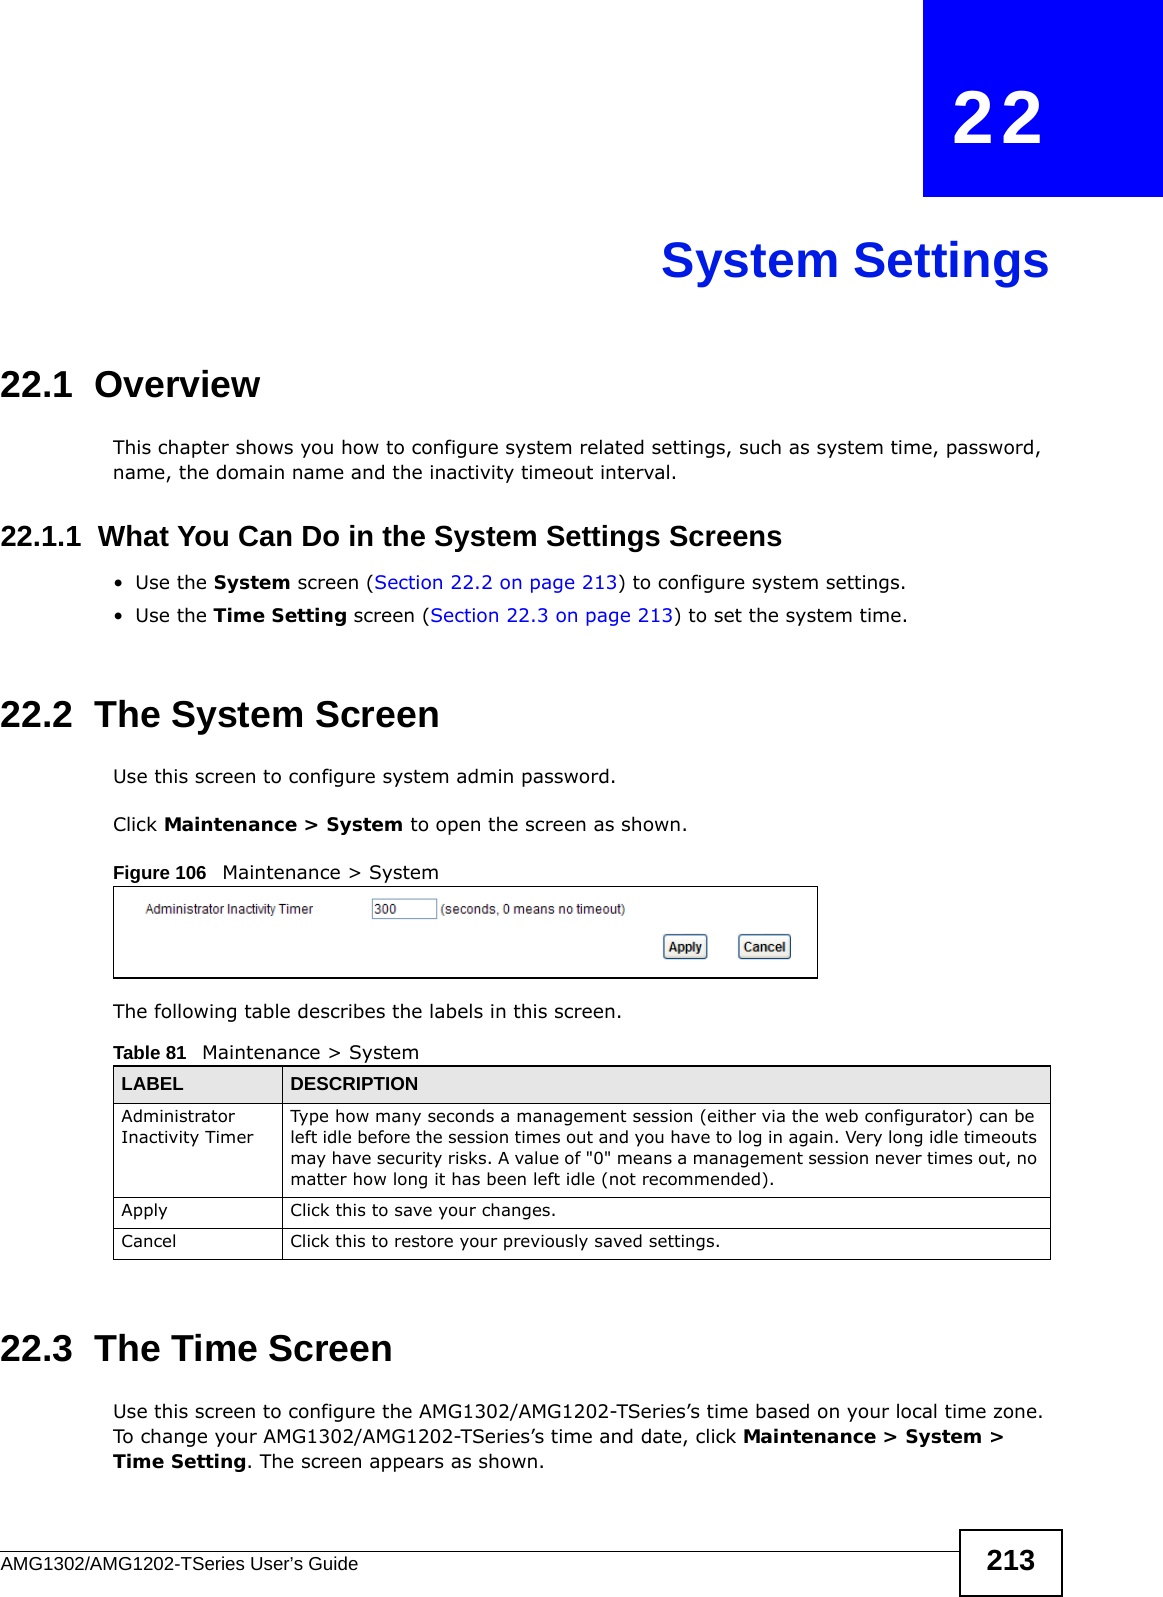 AMG1302/AMG1202-TSeries User’s Guide 213CHAPTER   22System Settings22.1  OverviewThis chapter shows you how to configure system related settings, such as system time, password, name, the domain name and the inactivity timeout interval.    22.1.1  What You Can Do in the System Settings Screens•Use the System screen (Section 22.2 on page 213) to configure system settings.•Use the Time Setting screen (Section 22.3 on page 213) to set the system time.22.2  The System ScreenUse this screen to configure system admin password.Click Maintenance &gt; System to open the screen as shown. Figure 106   Maintenance &gt; SystemThe following table describes the labels in this screen. 22.3  The Time Screen Use this screen to configure the AMG1302/AMG1202-TSeries’s time based on your local time zone. To change your AMG1302/AMG1202-TSeries’s time and date, click Maintenance &gt; System &gt; Time Setting. The screen appears as shown.Table 81   Maintenance &gt; SystemLABEL DESCRIPTIONAdministrator Inactivity TimerType how many seconds a management session (either via the web configurator) can be left idle before the session times out and you have to log in again. Very long idle timeouts may have security risks. A value of &quot;0&quot; means a management session never times out, no matter how long it has been left idle (not recommended).Apply Click this to save your changes.Cancel Click this to restore your previously saved settings.